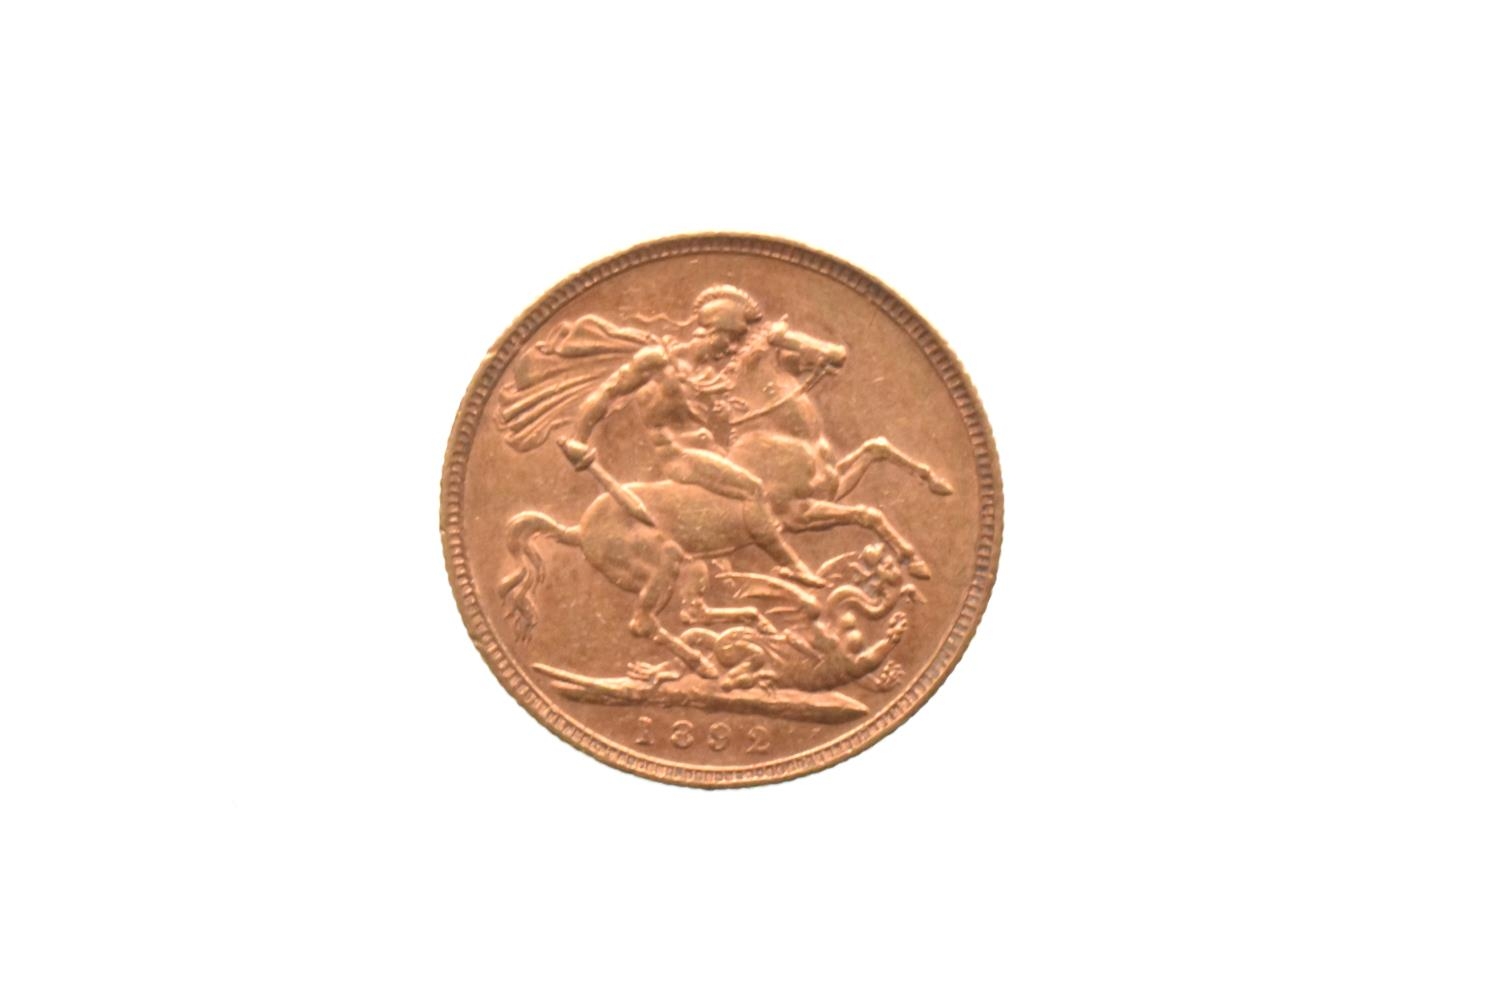 United Kingdom - Victoria (1837-1901), Gold Sovereign, 'Jubilee Bust', dated 1892, London mint,